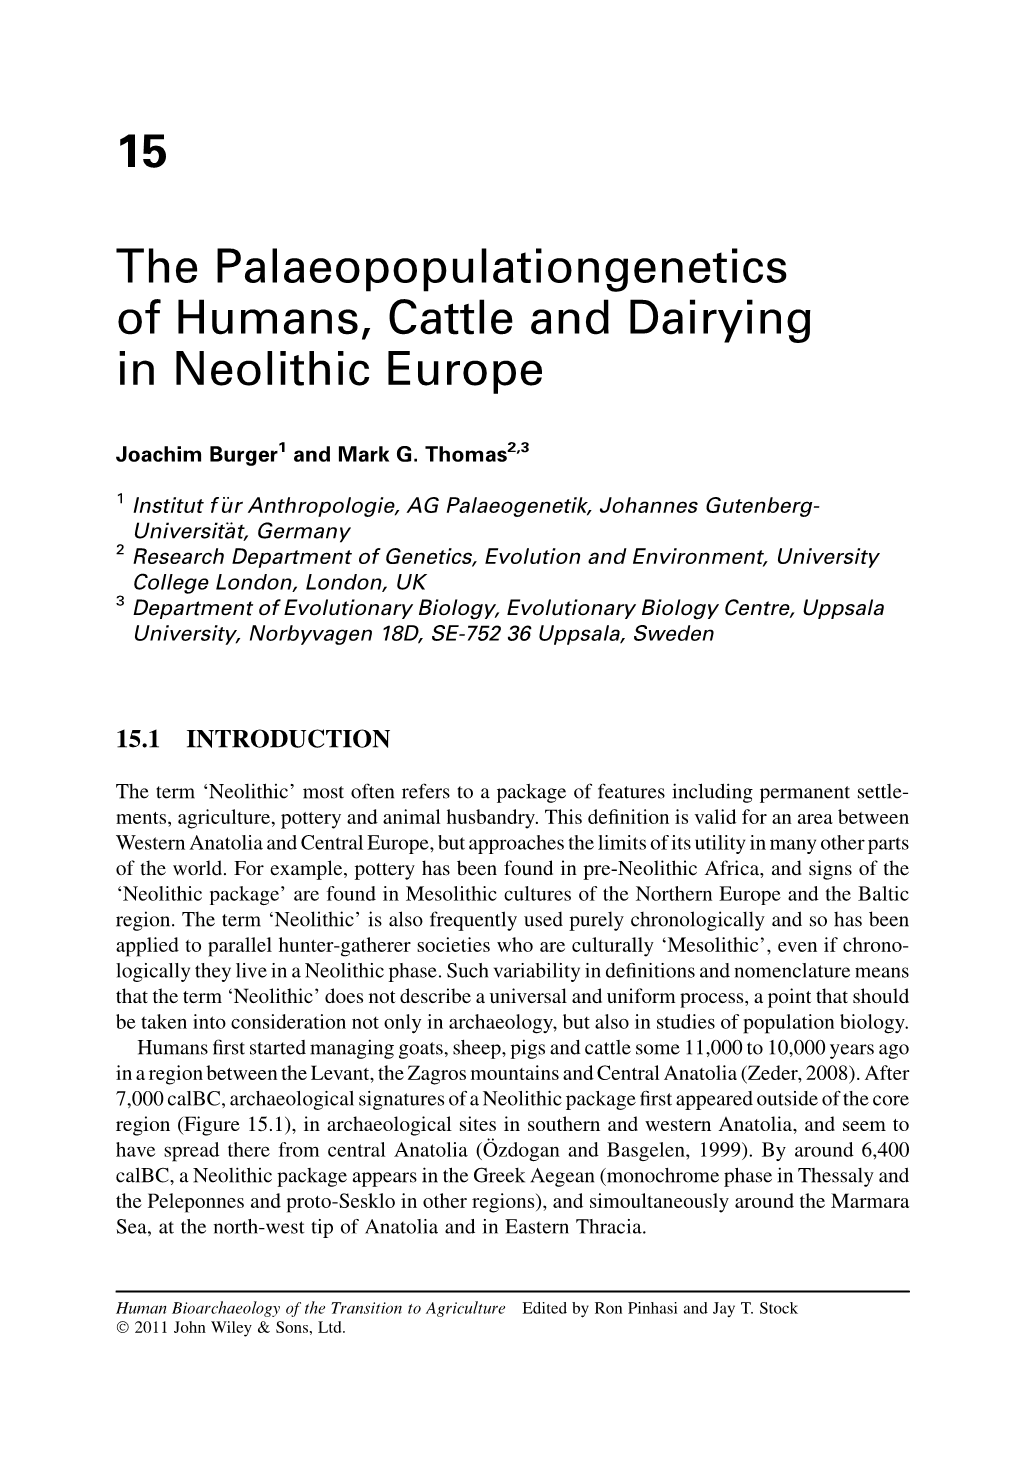 15 the Palaeopopulationgenetics of Humans, Cattle and Dairying In